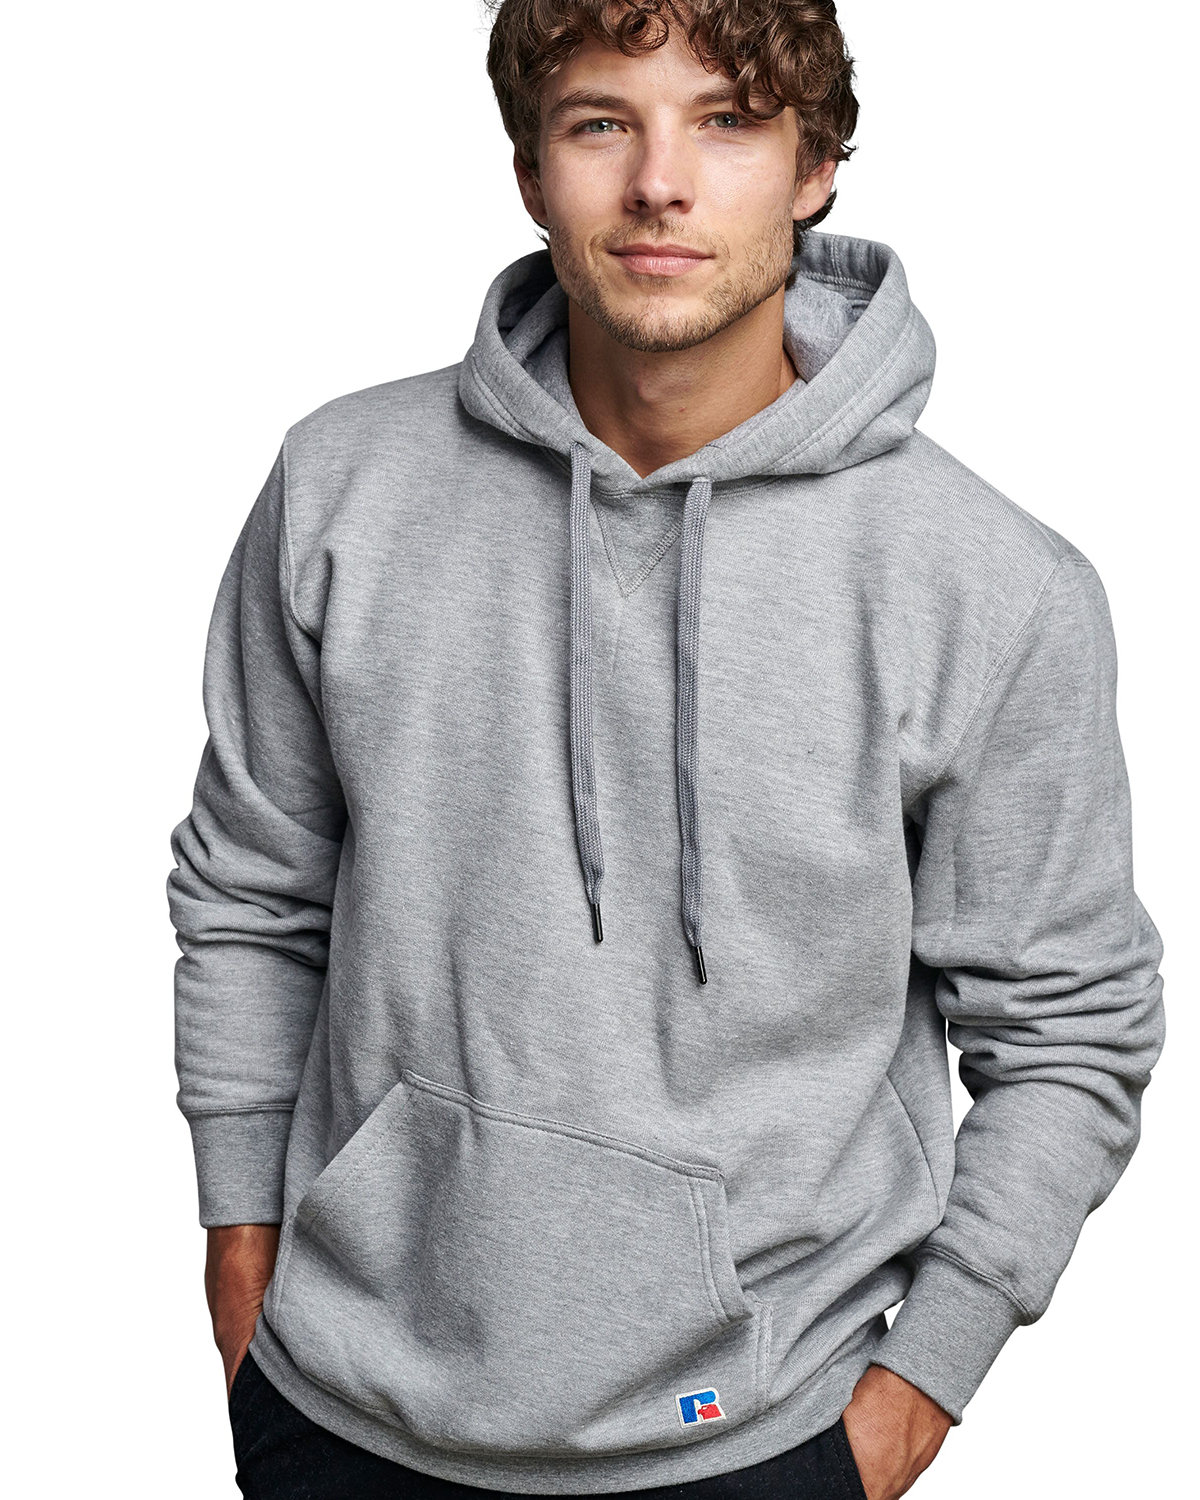 Russell Athletic Unisex Cotton Classic Hooded Sweatshirt ATHLETIC HEATHER 